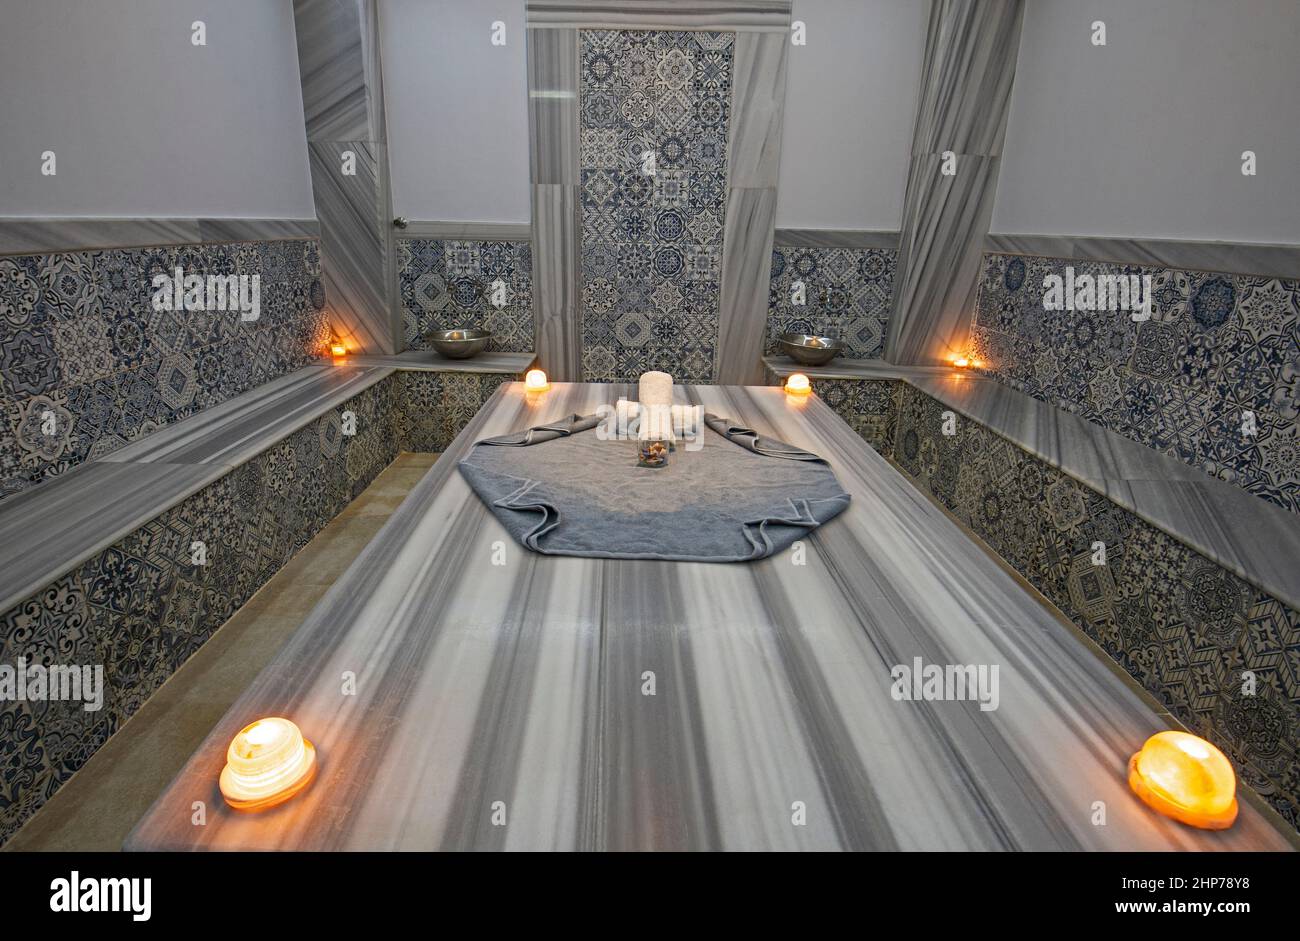 Interior design of turkish baths in luxury health spa with massage table and candles Stock Photo